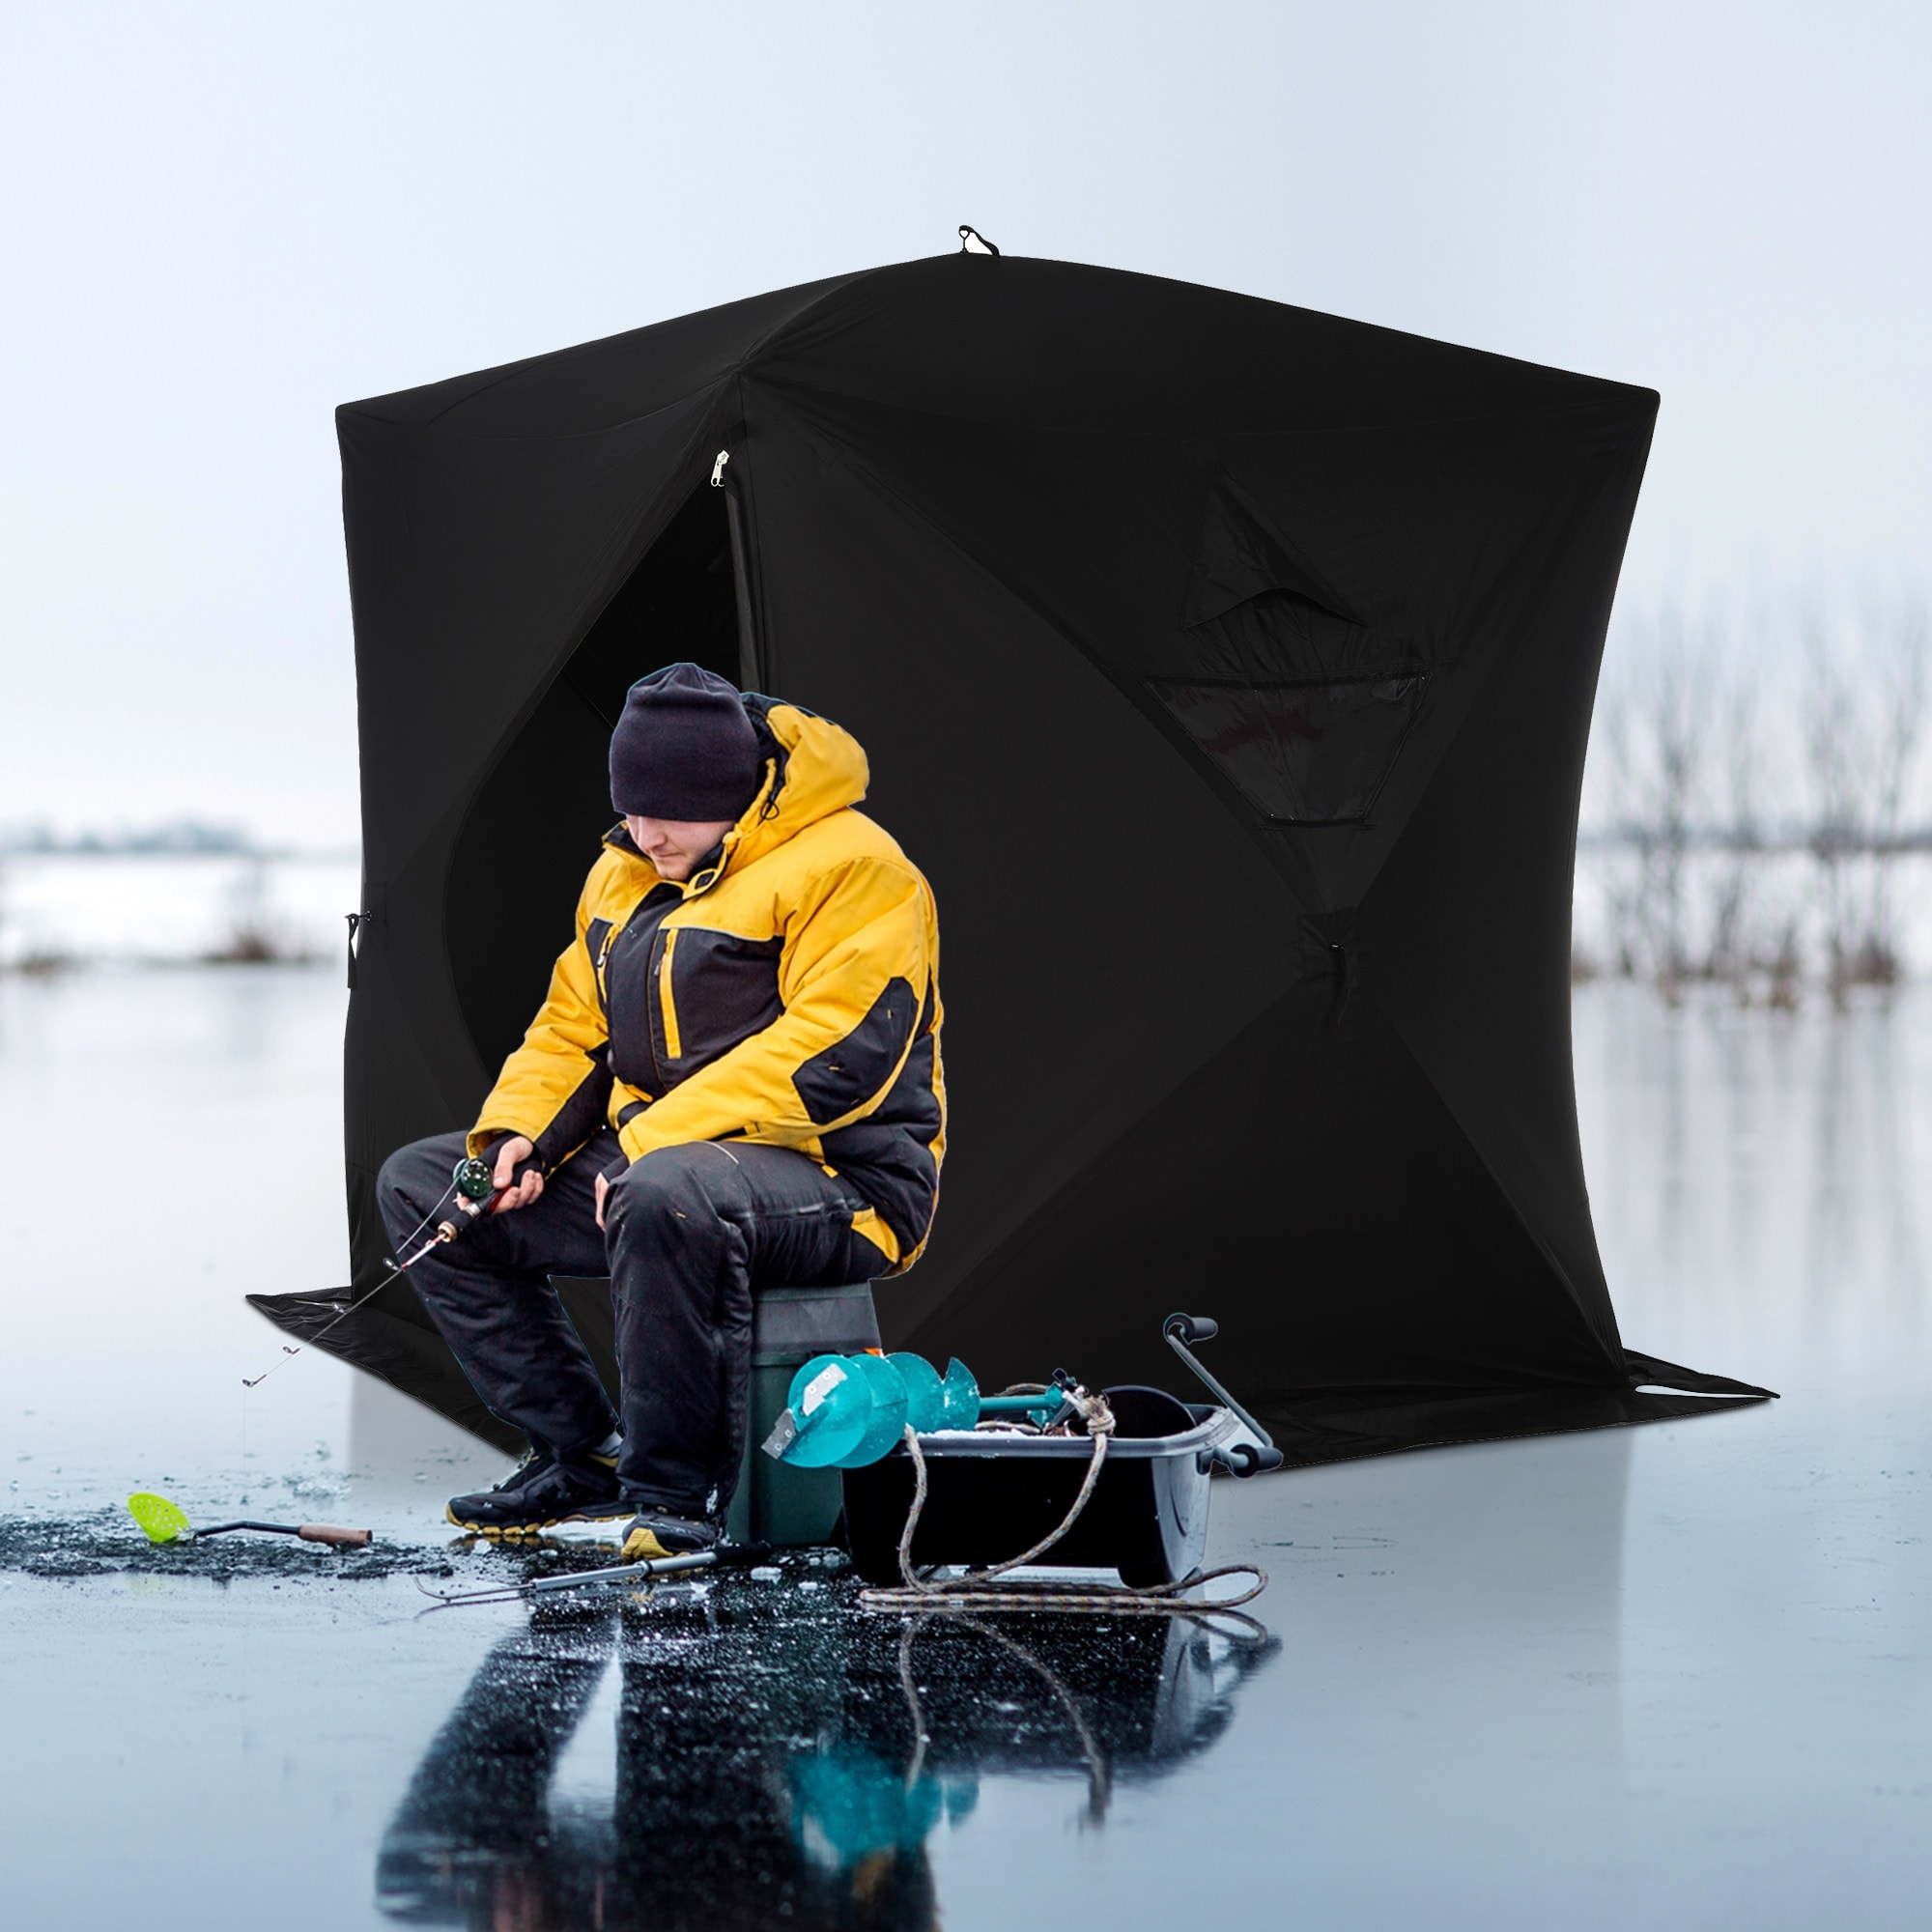 Outsunny 4 Person Ice Fishing Shelter Insulated Waterproof Portable Pop Up Ice Tent with 2 Doors for Outdoor Fishing - Black